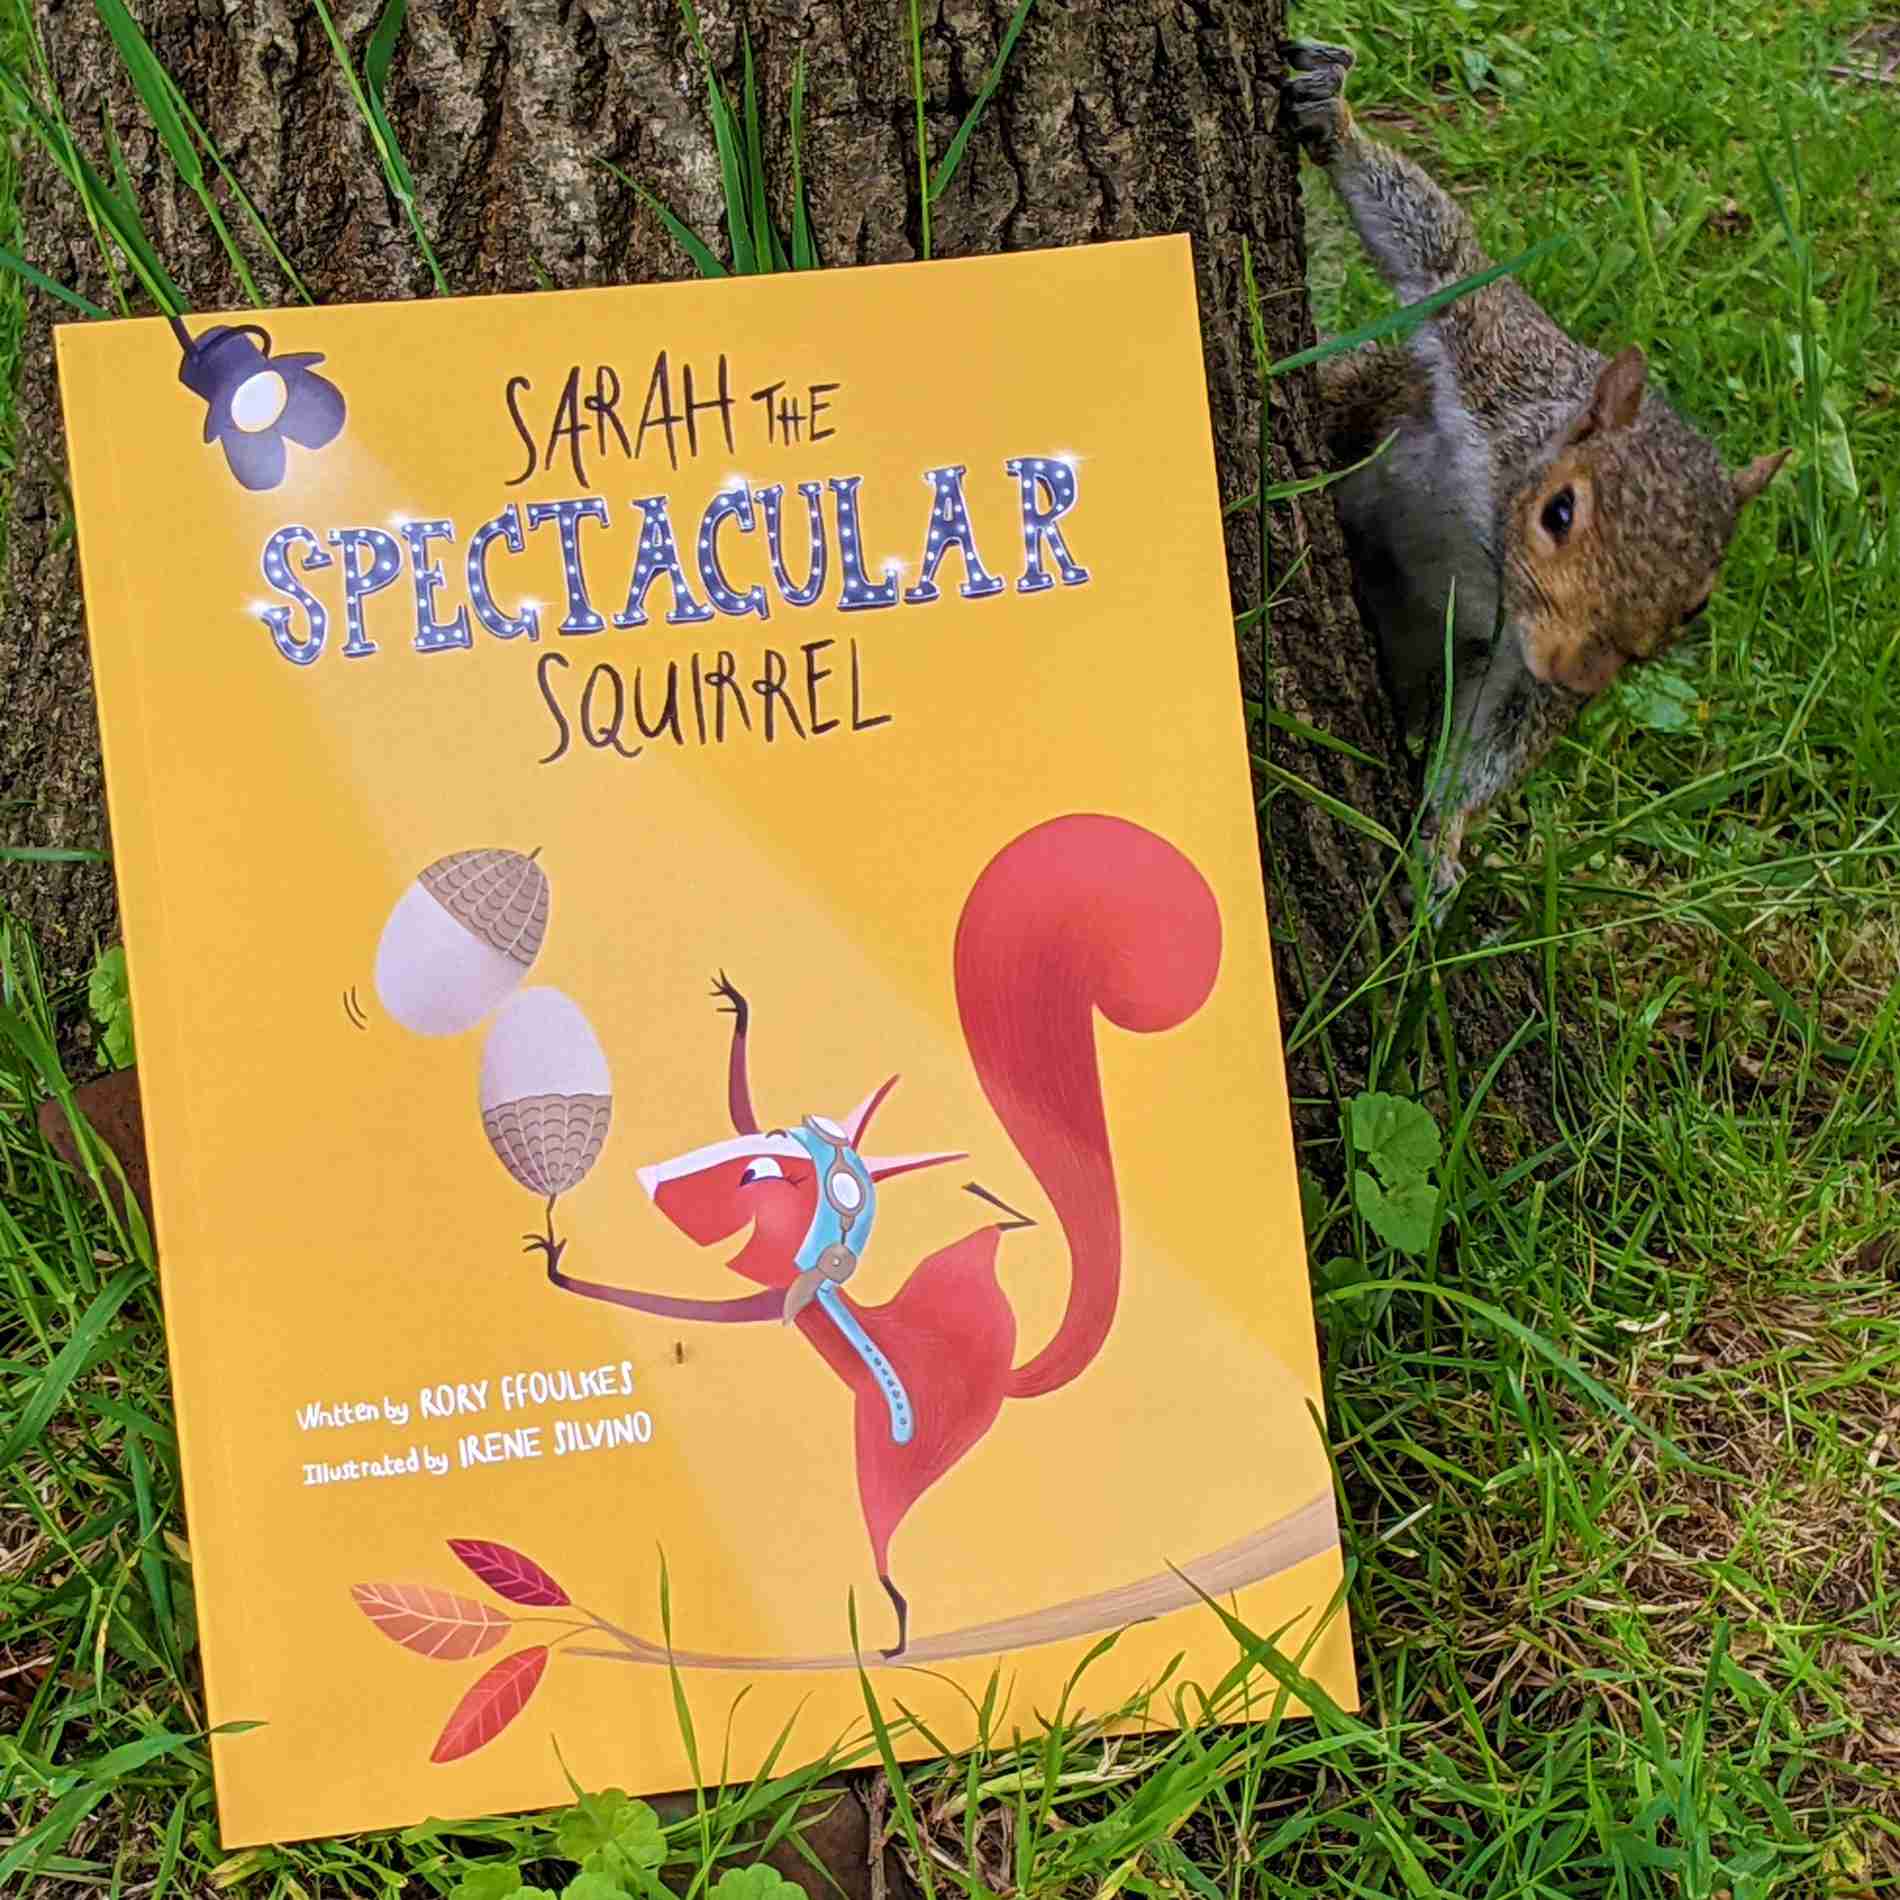 Sarah The Spectacular Squirrel, a brand new illustrated children’s book conceived and written by Harrogate author, Rory ffoulkes